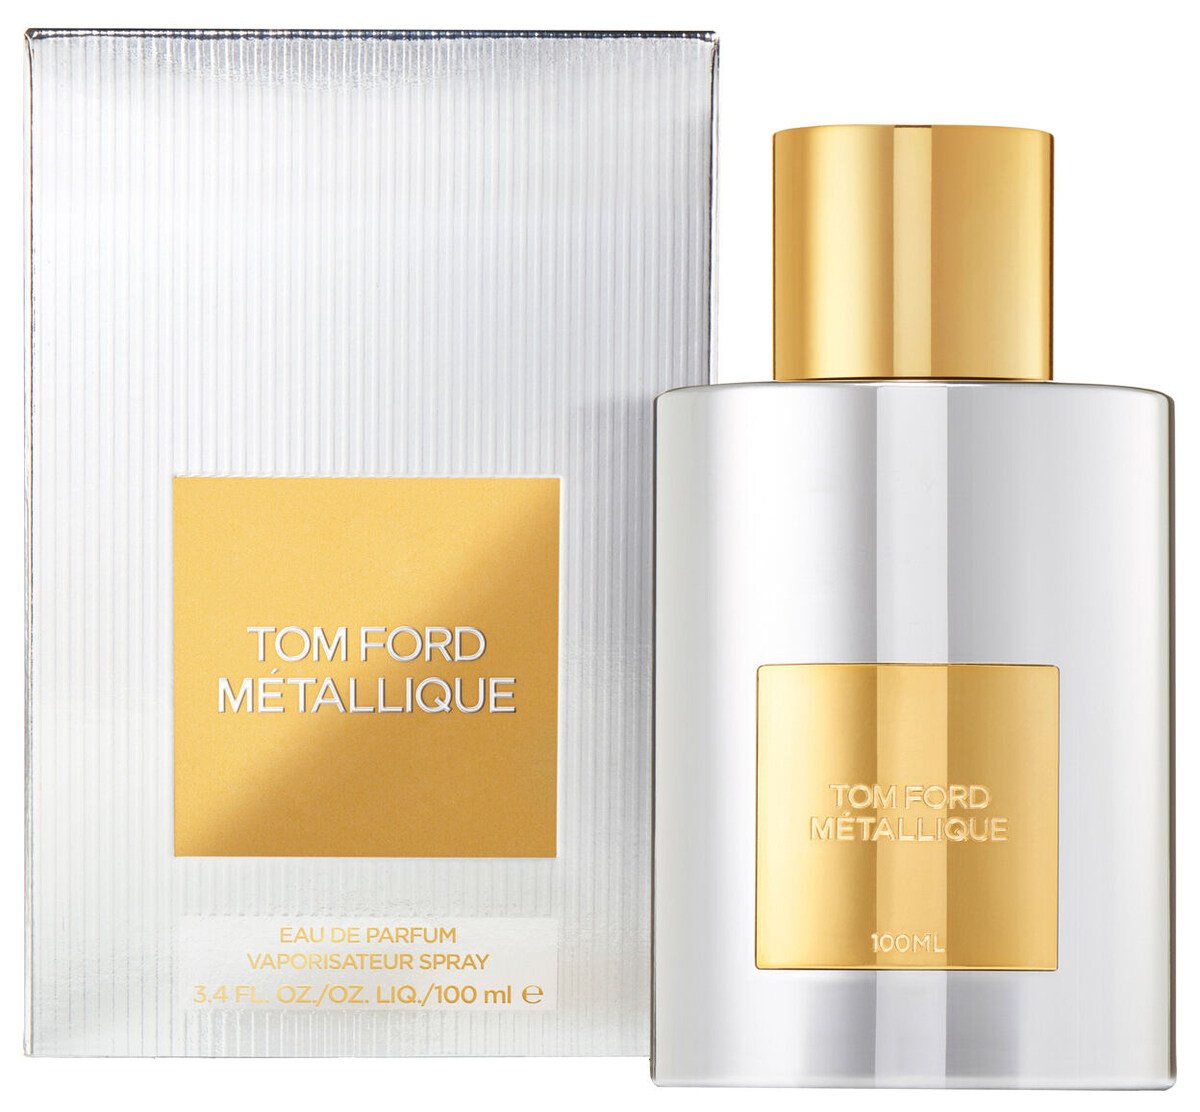 Métallique by Tom Ford » Reviews & Perfume Facts